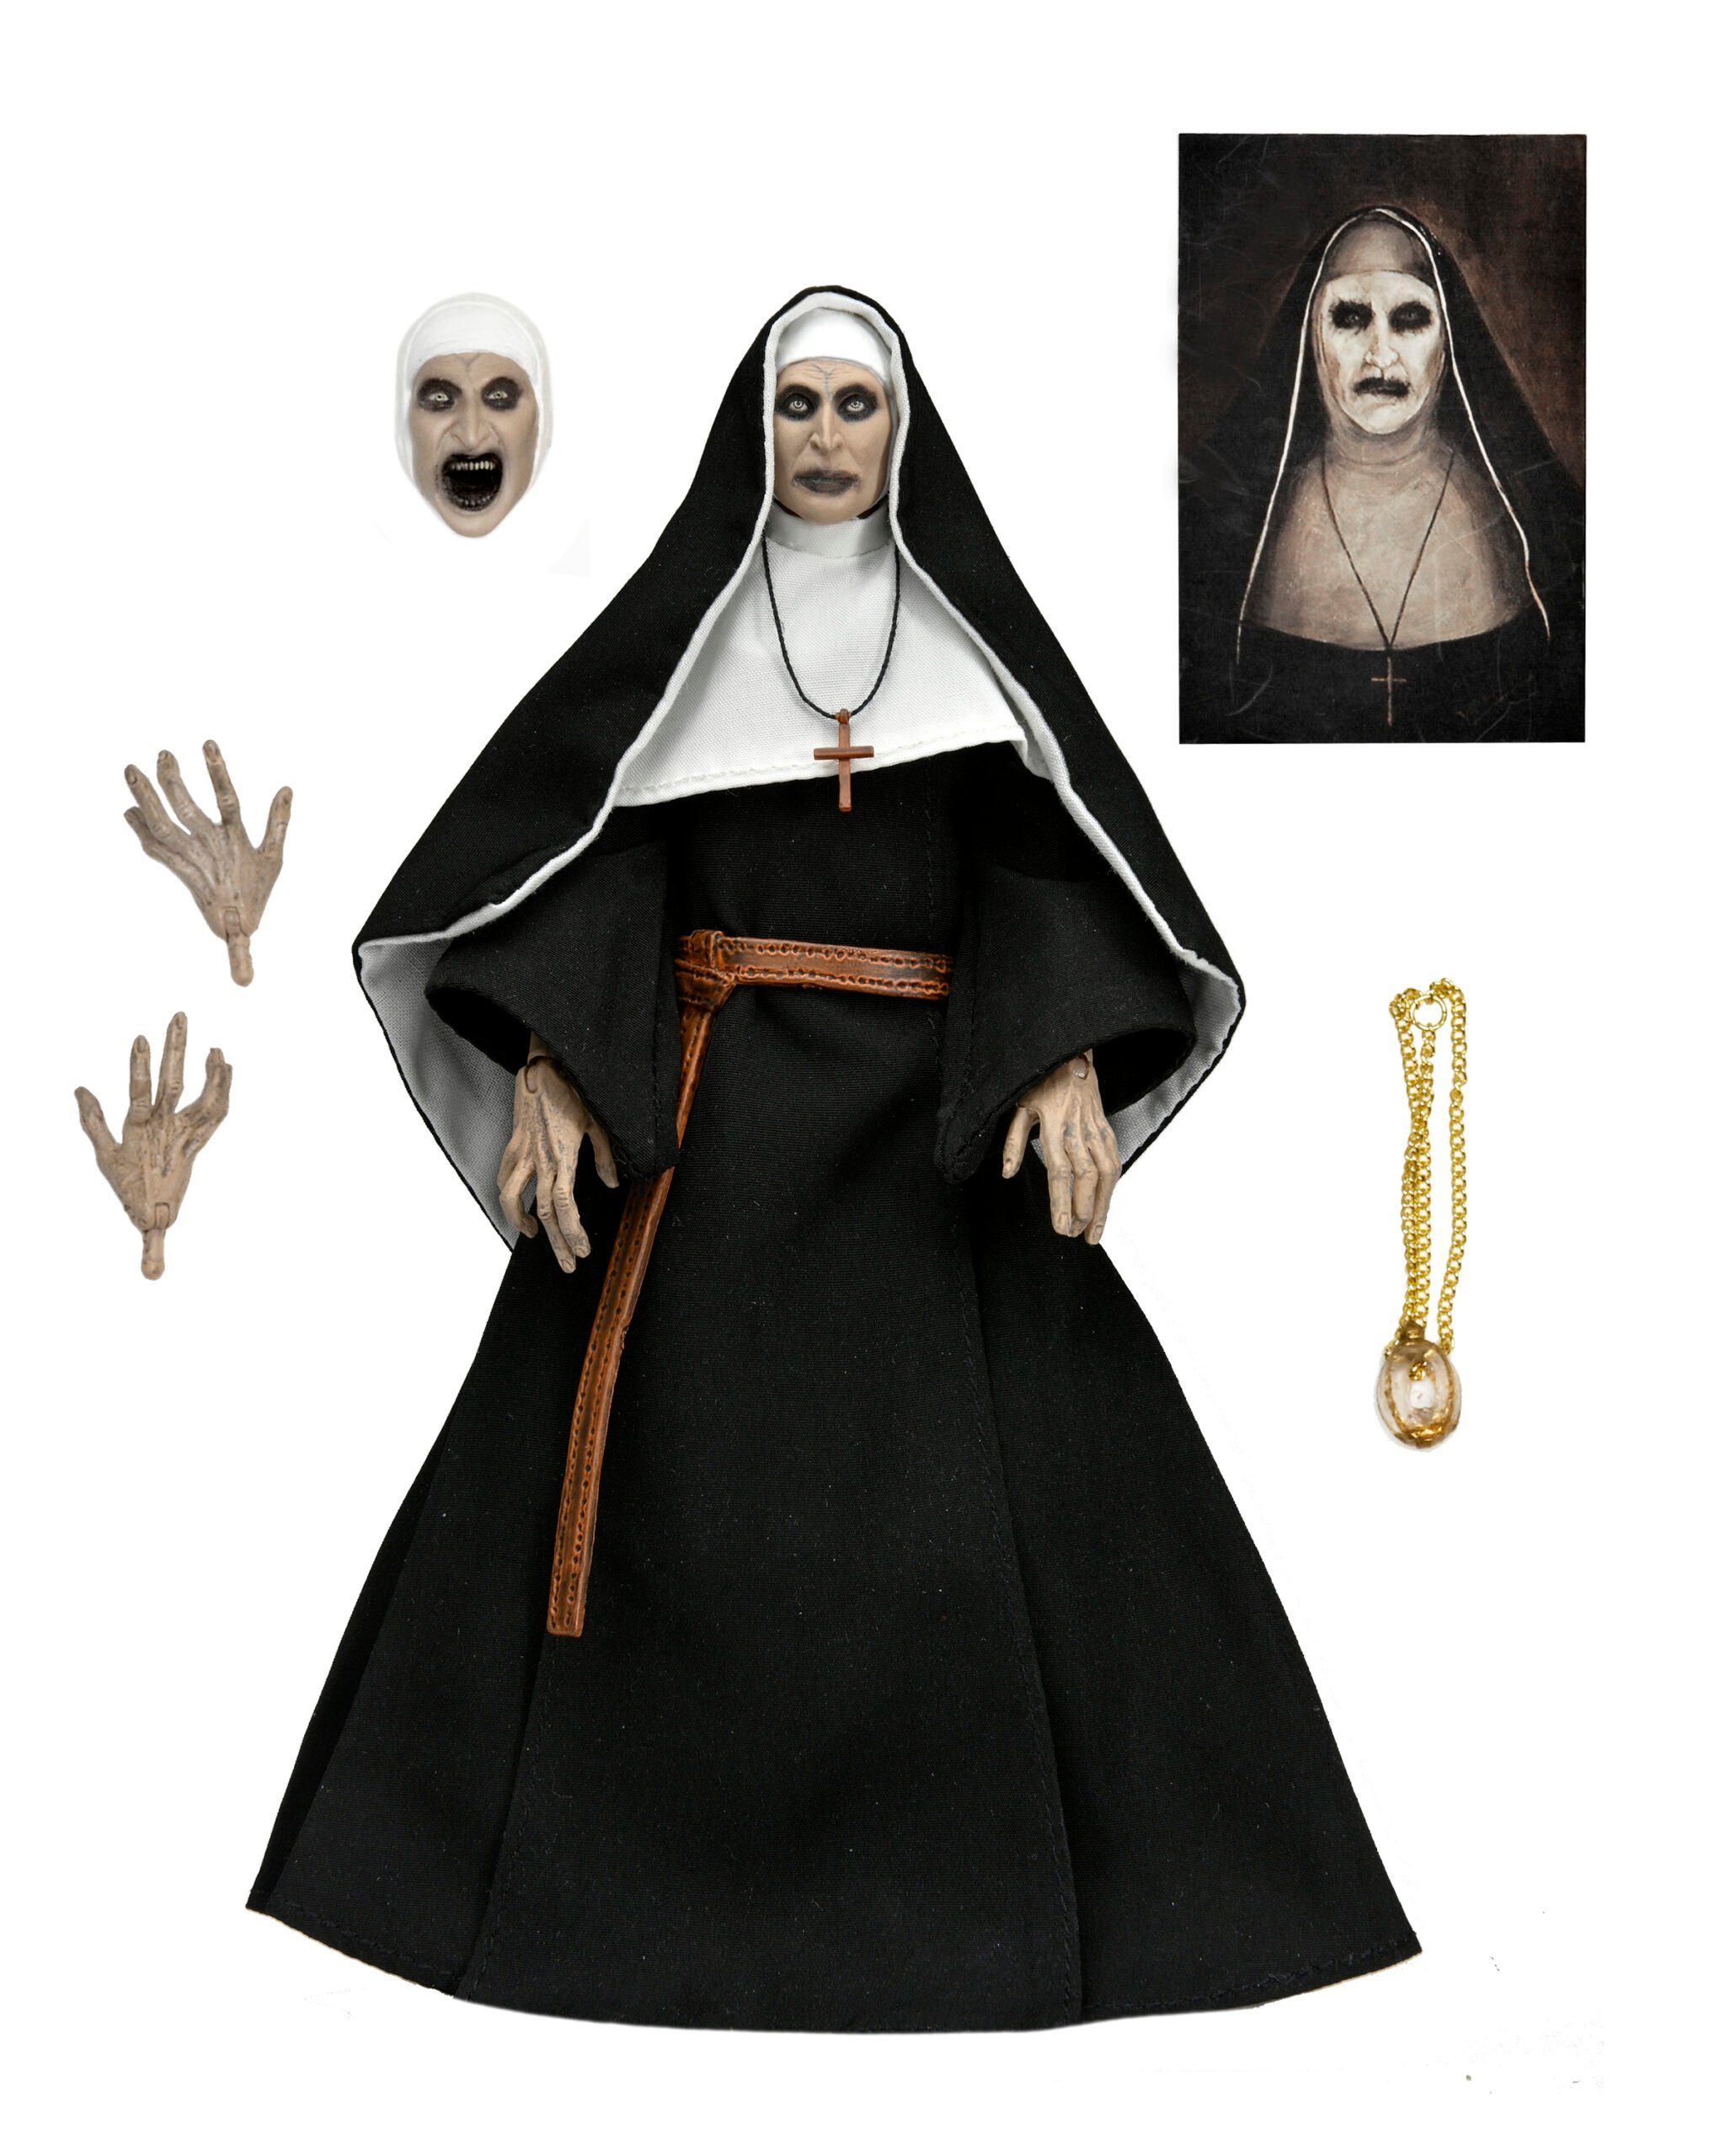 NECA Actionfigur NECA The Conjuring Universe Ultimate The Nun Valak 7 Inch Actionfigur